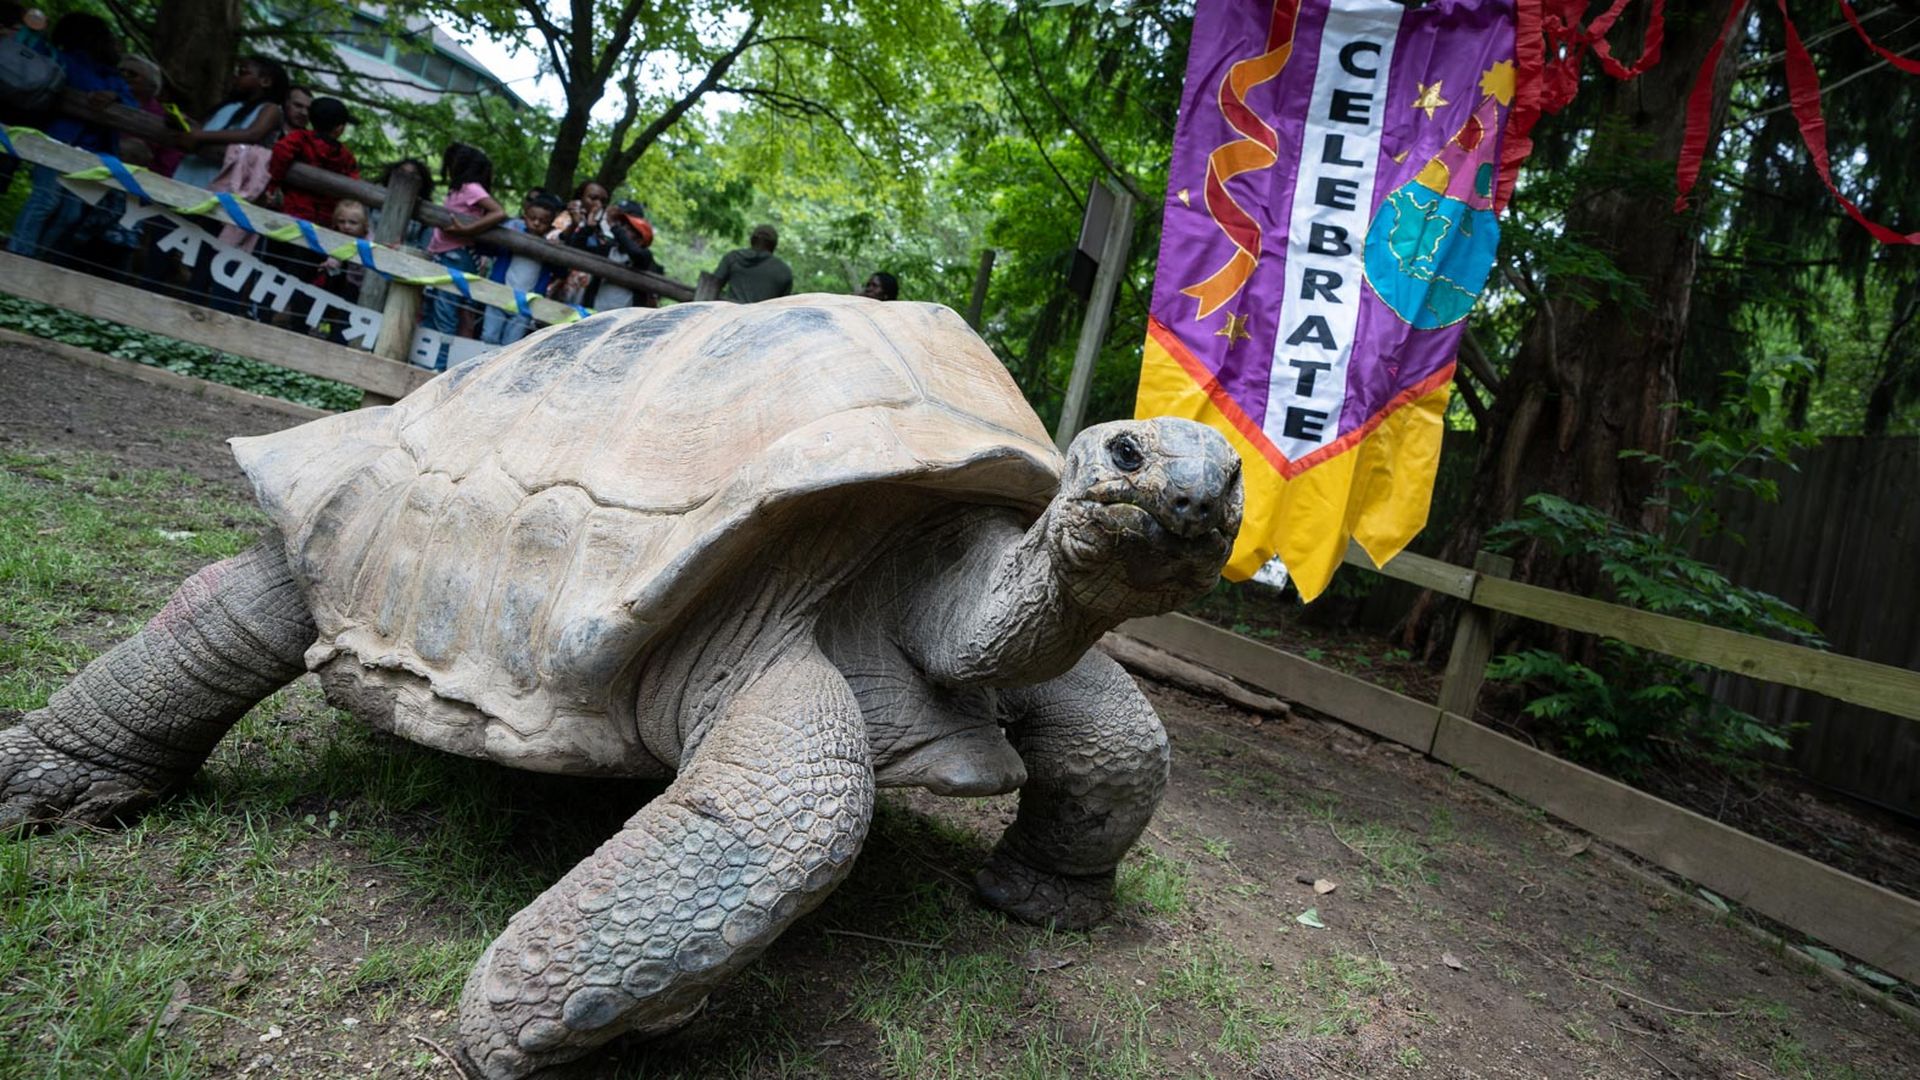 A tortoise standing in front of a "celebrate" banner